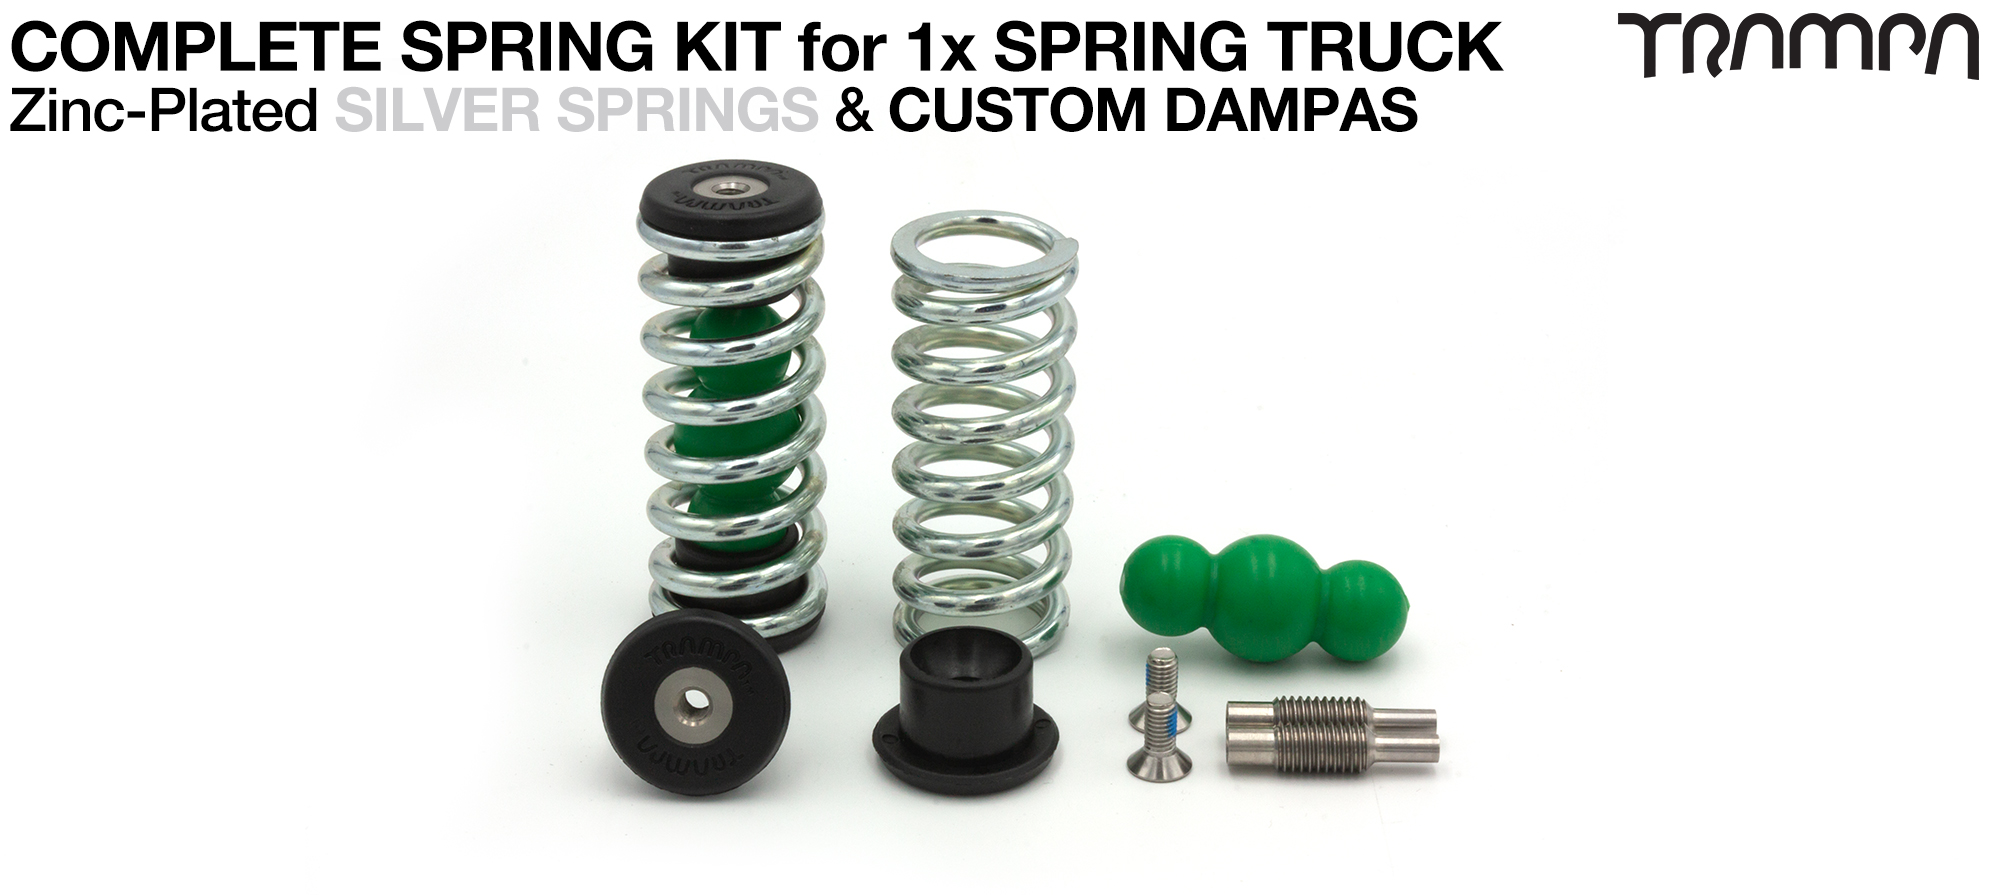 Spring kit Complete for 1x Truck - 2x Spring 2x Dampa 4x Spring Retainers 2x Spring Adjuster & 2 M5x12mm Countersunk Bolt  SILVER Springs 